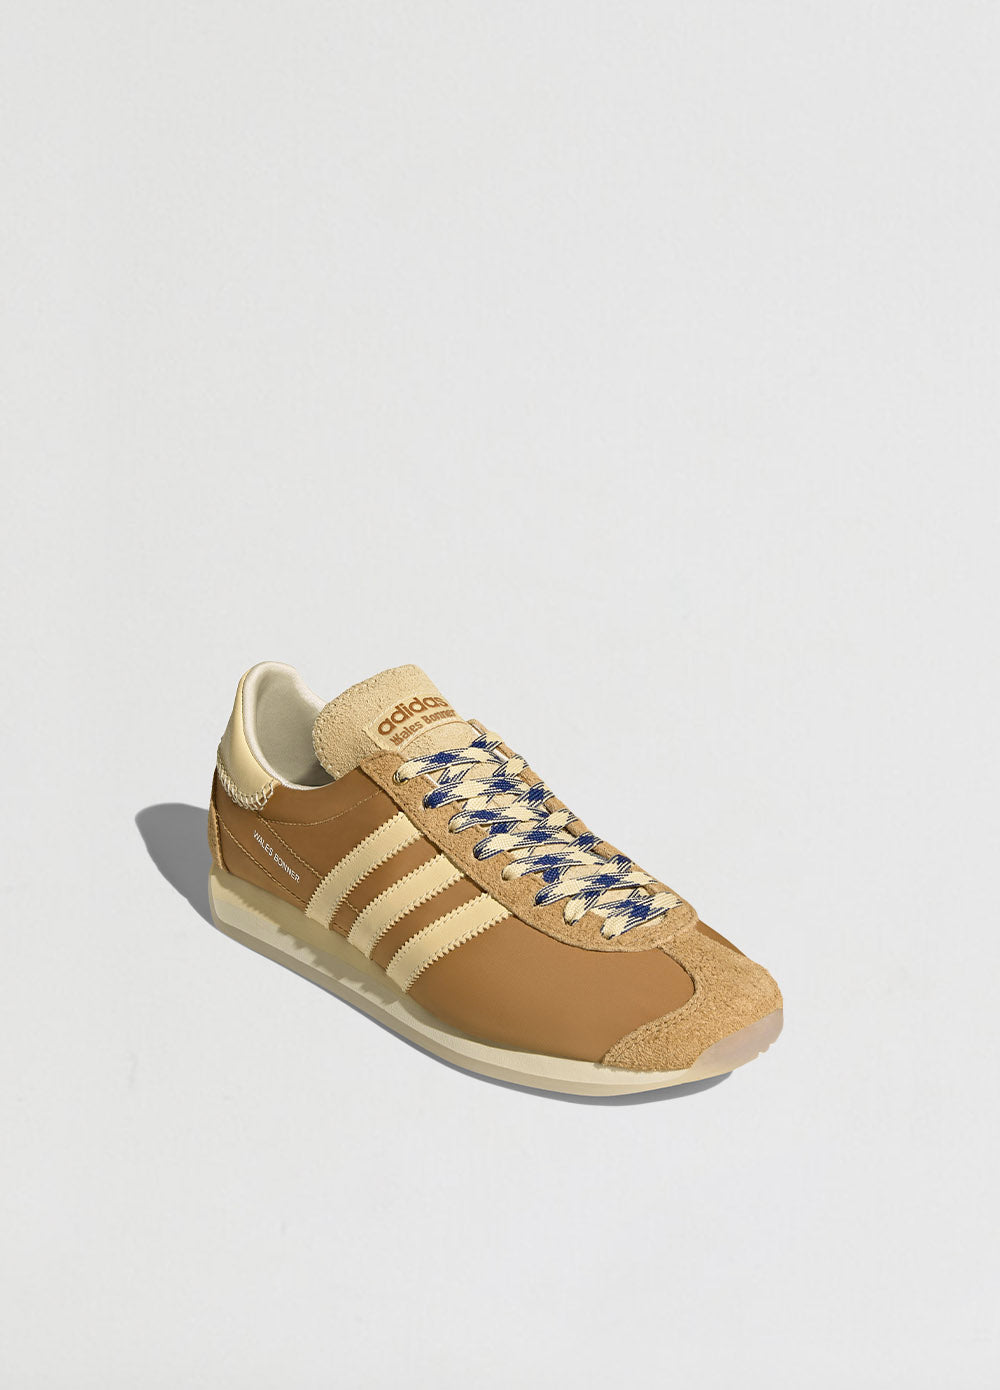 adidas x Wales Bonner Country Sneaker